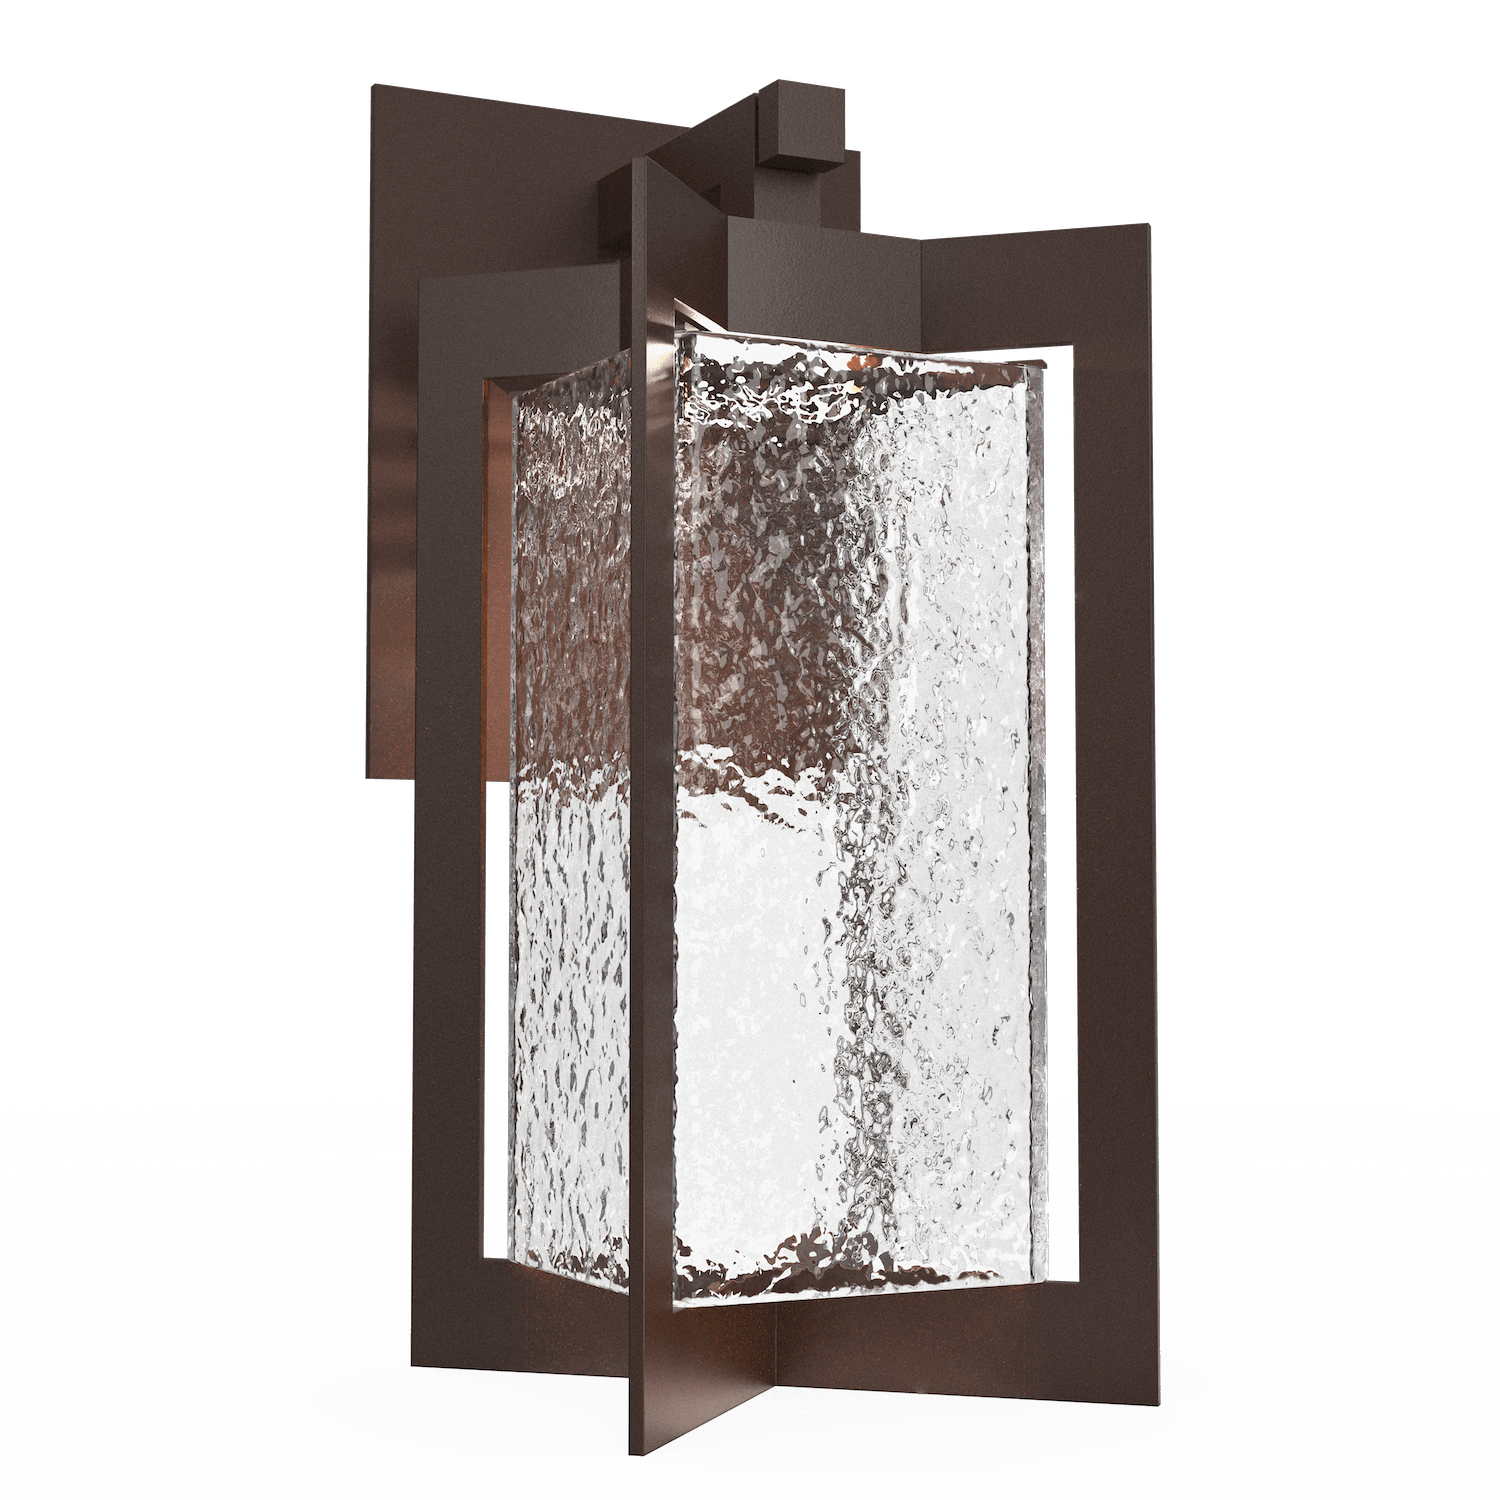 Hammerton Studio Quad Lantern Outdoor l Wall Hammerton Studio Statuary Bronze (Outdoor) Clear Glass with Hammered Texture 